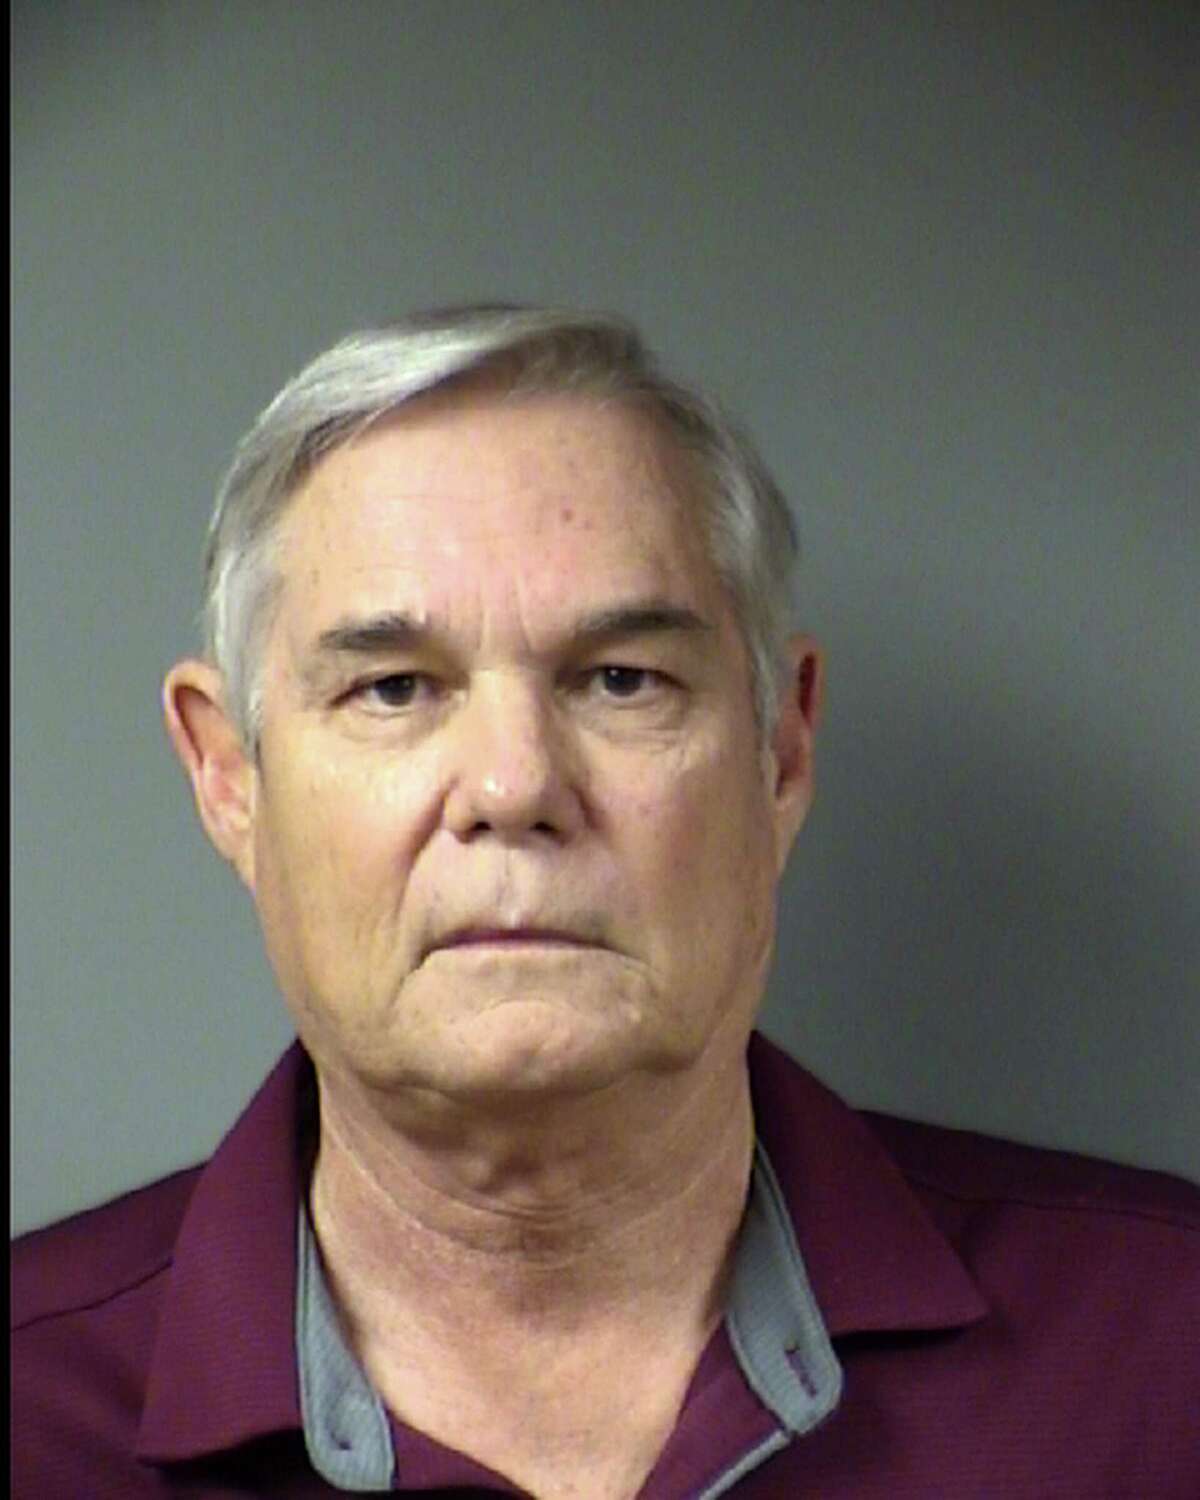 San Antonio District 10 city council member Clayton Perry is seen in a Nov. 10 booking photo provided by the Bexar County Sheriff’s Office. Perry was arrested after he was accused fleeing the scene of car crash he caused Nov. 6 on the Northeast Side.